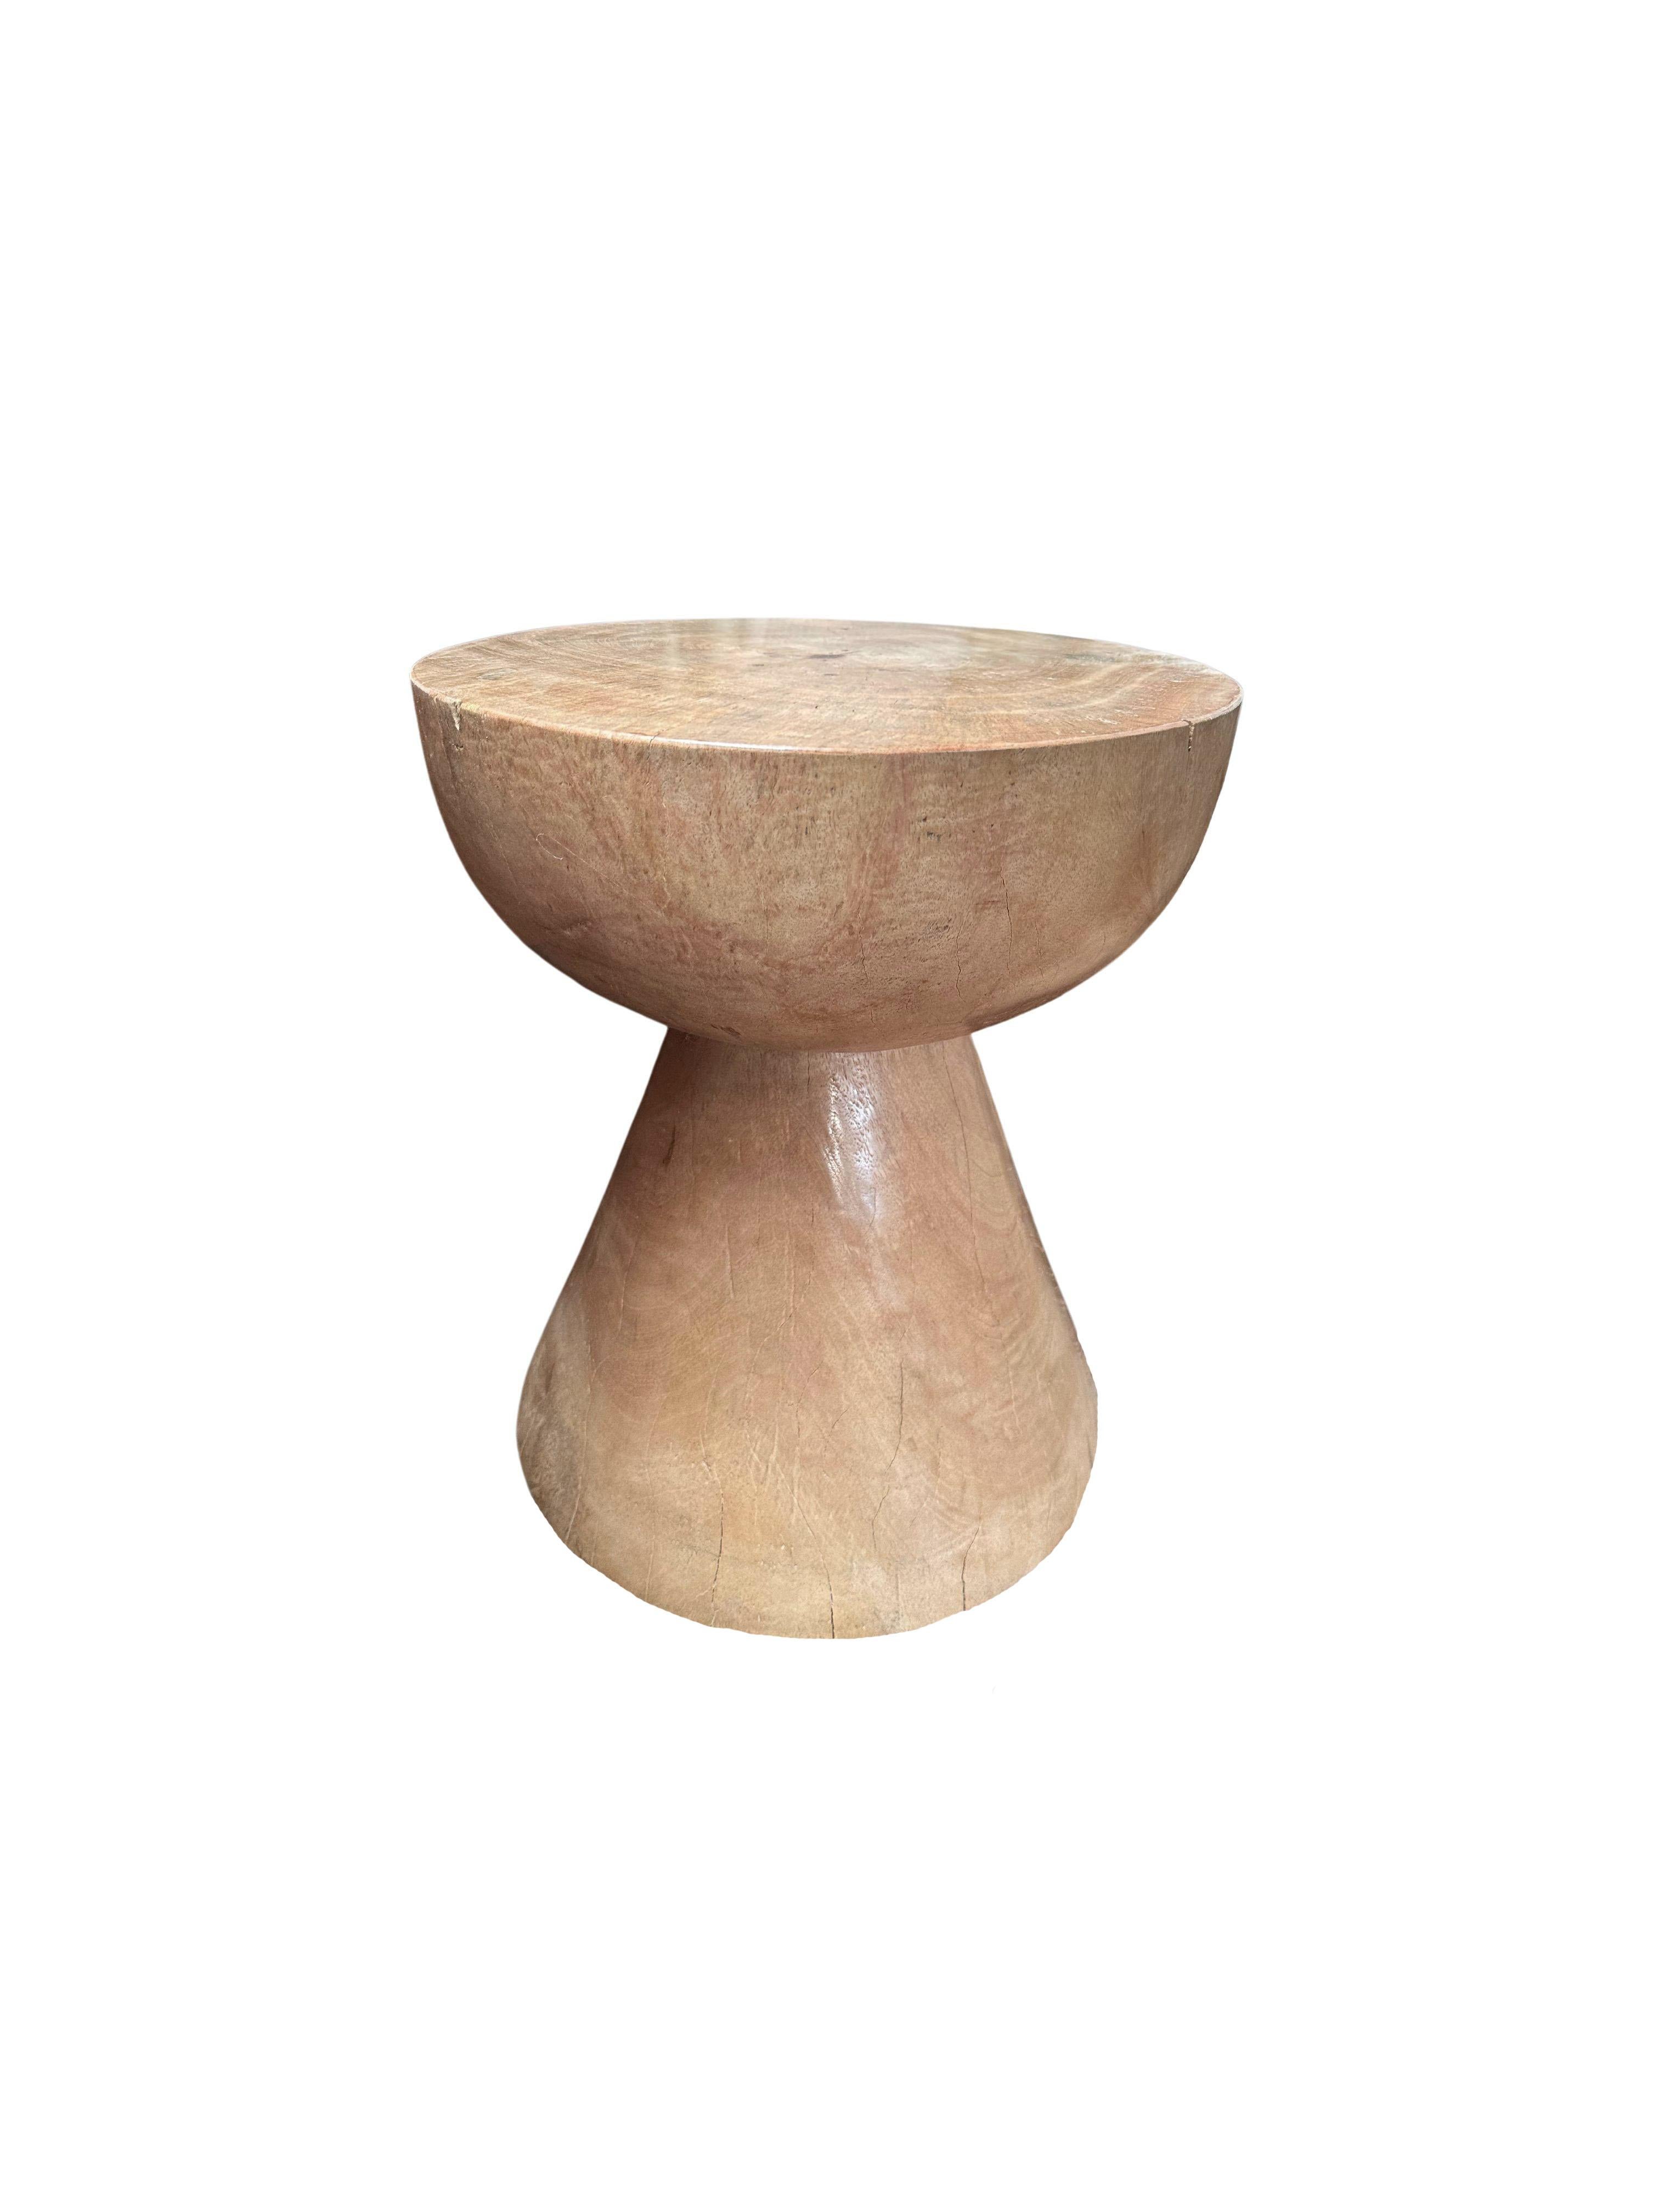 This wonderfully sculptural round side table features a bleached finish, providing a washed out tone to the wood. The table's neutral pigment makes it perfect for any space. It was crafted from a solid block of mango wood and has elegant mix of wood